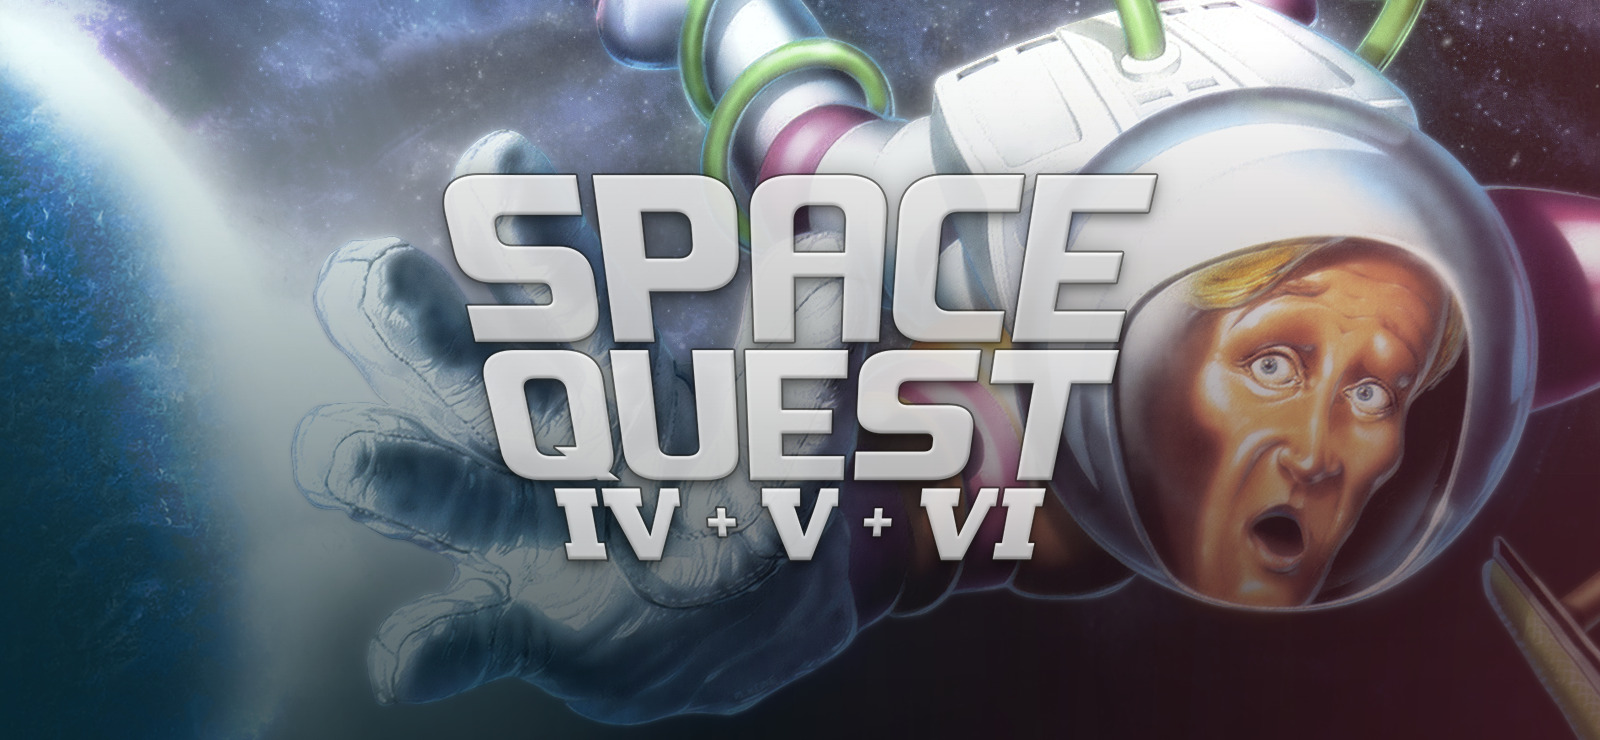 Steam space quest collection фото 67